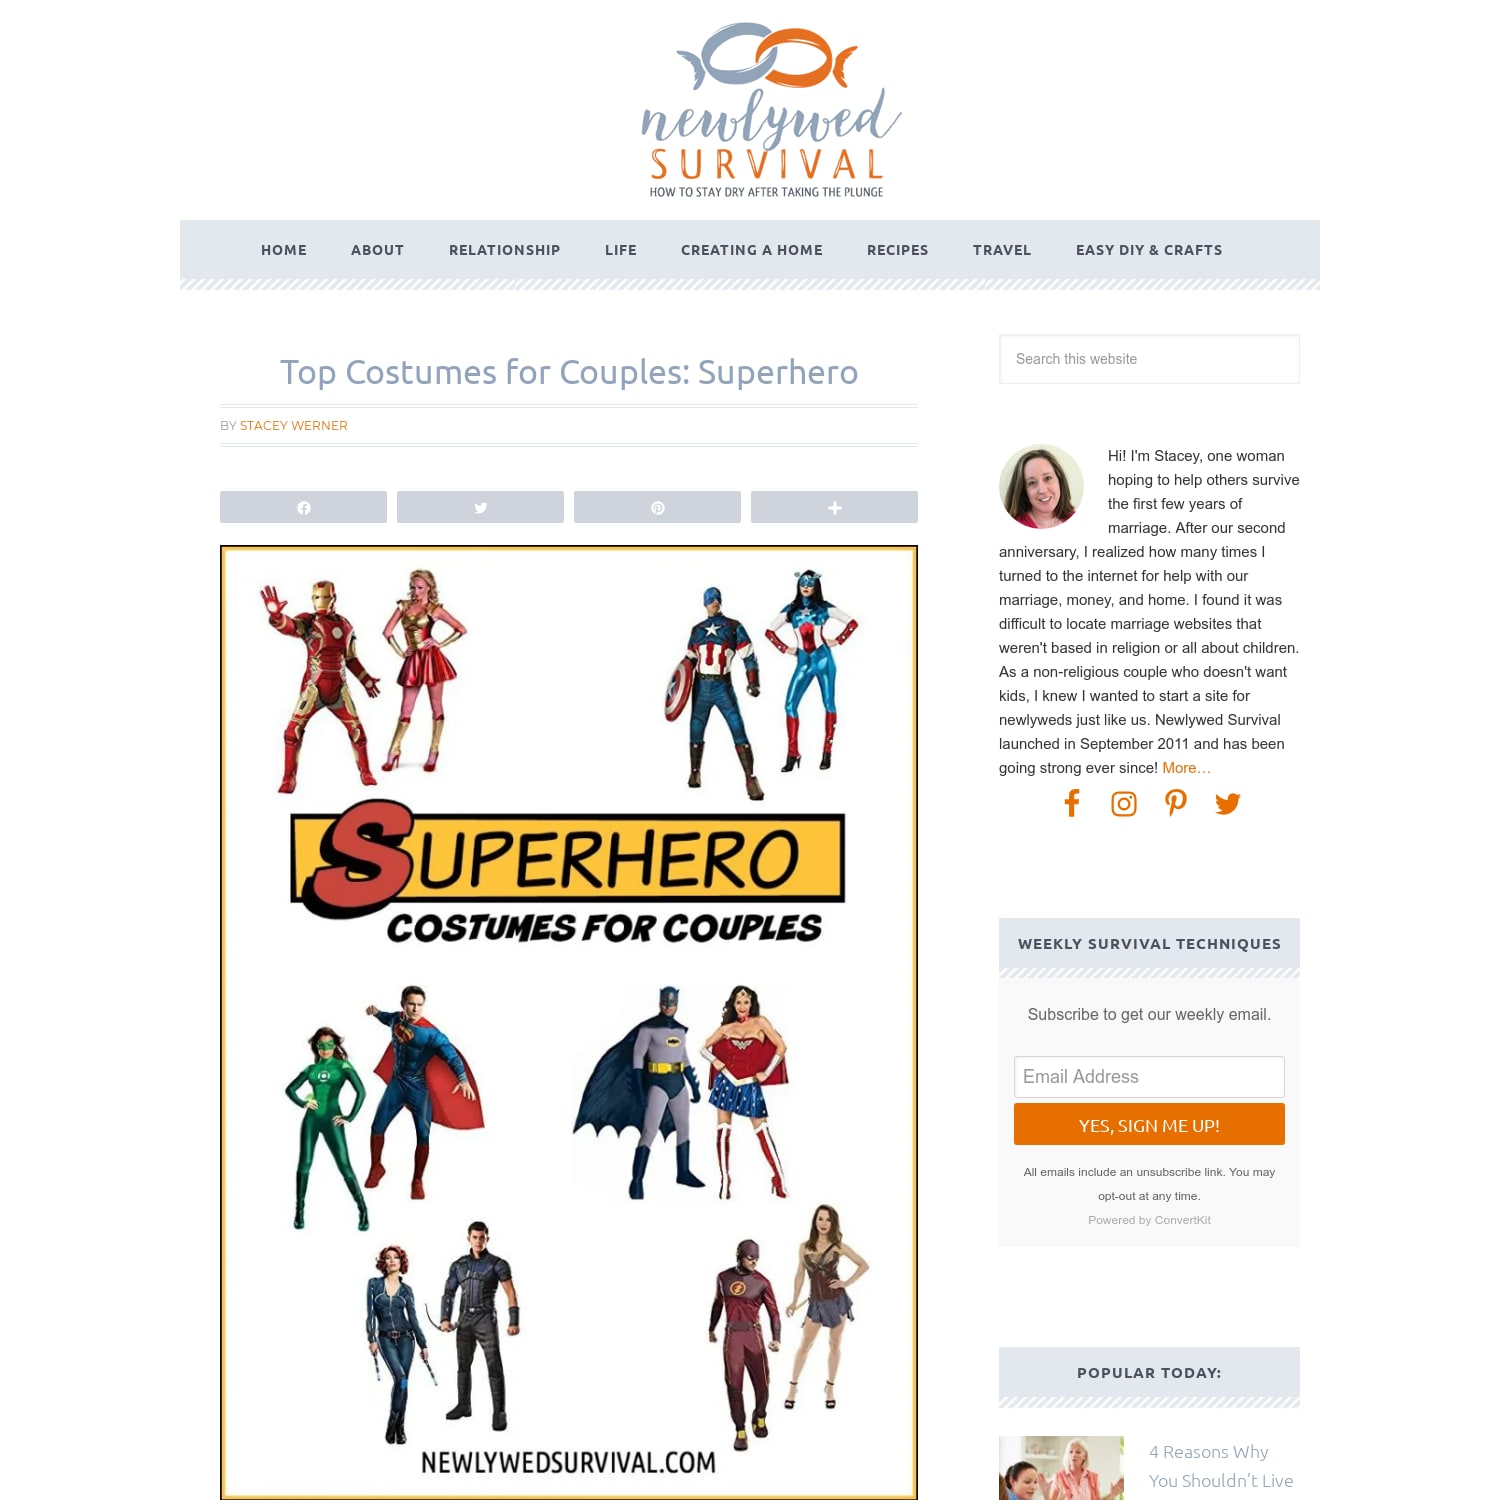 Top Costumes for Couples: Superhero